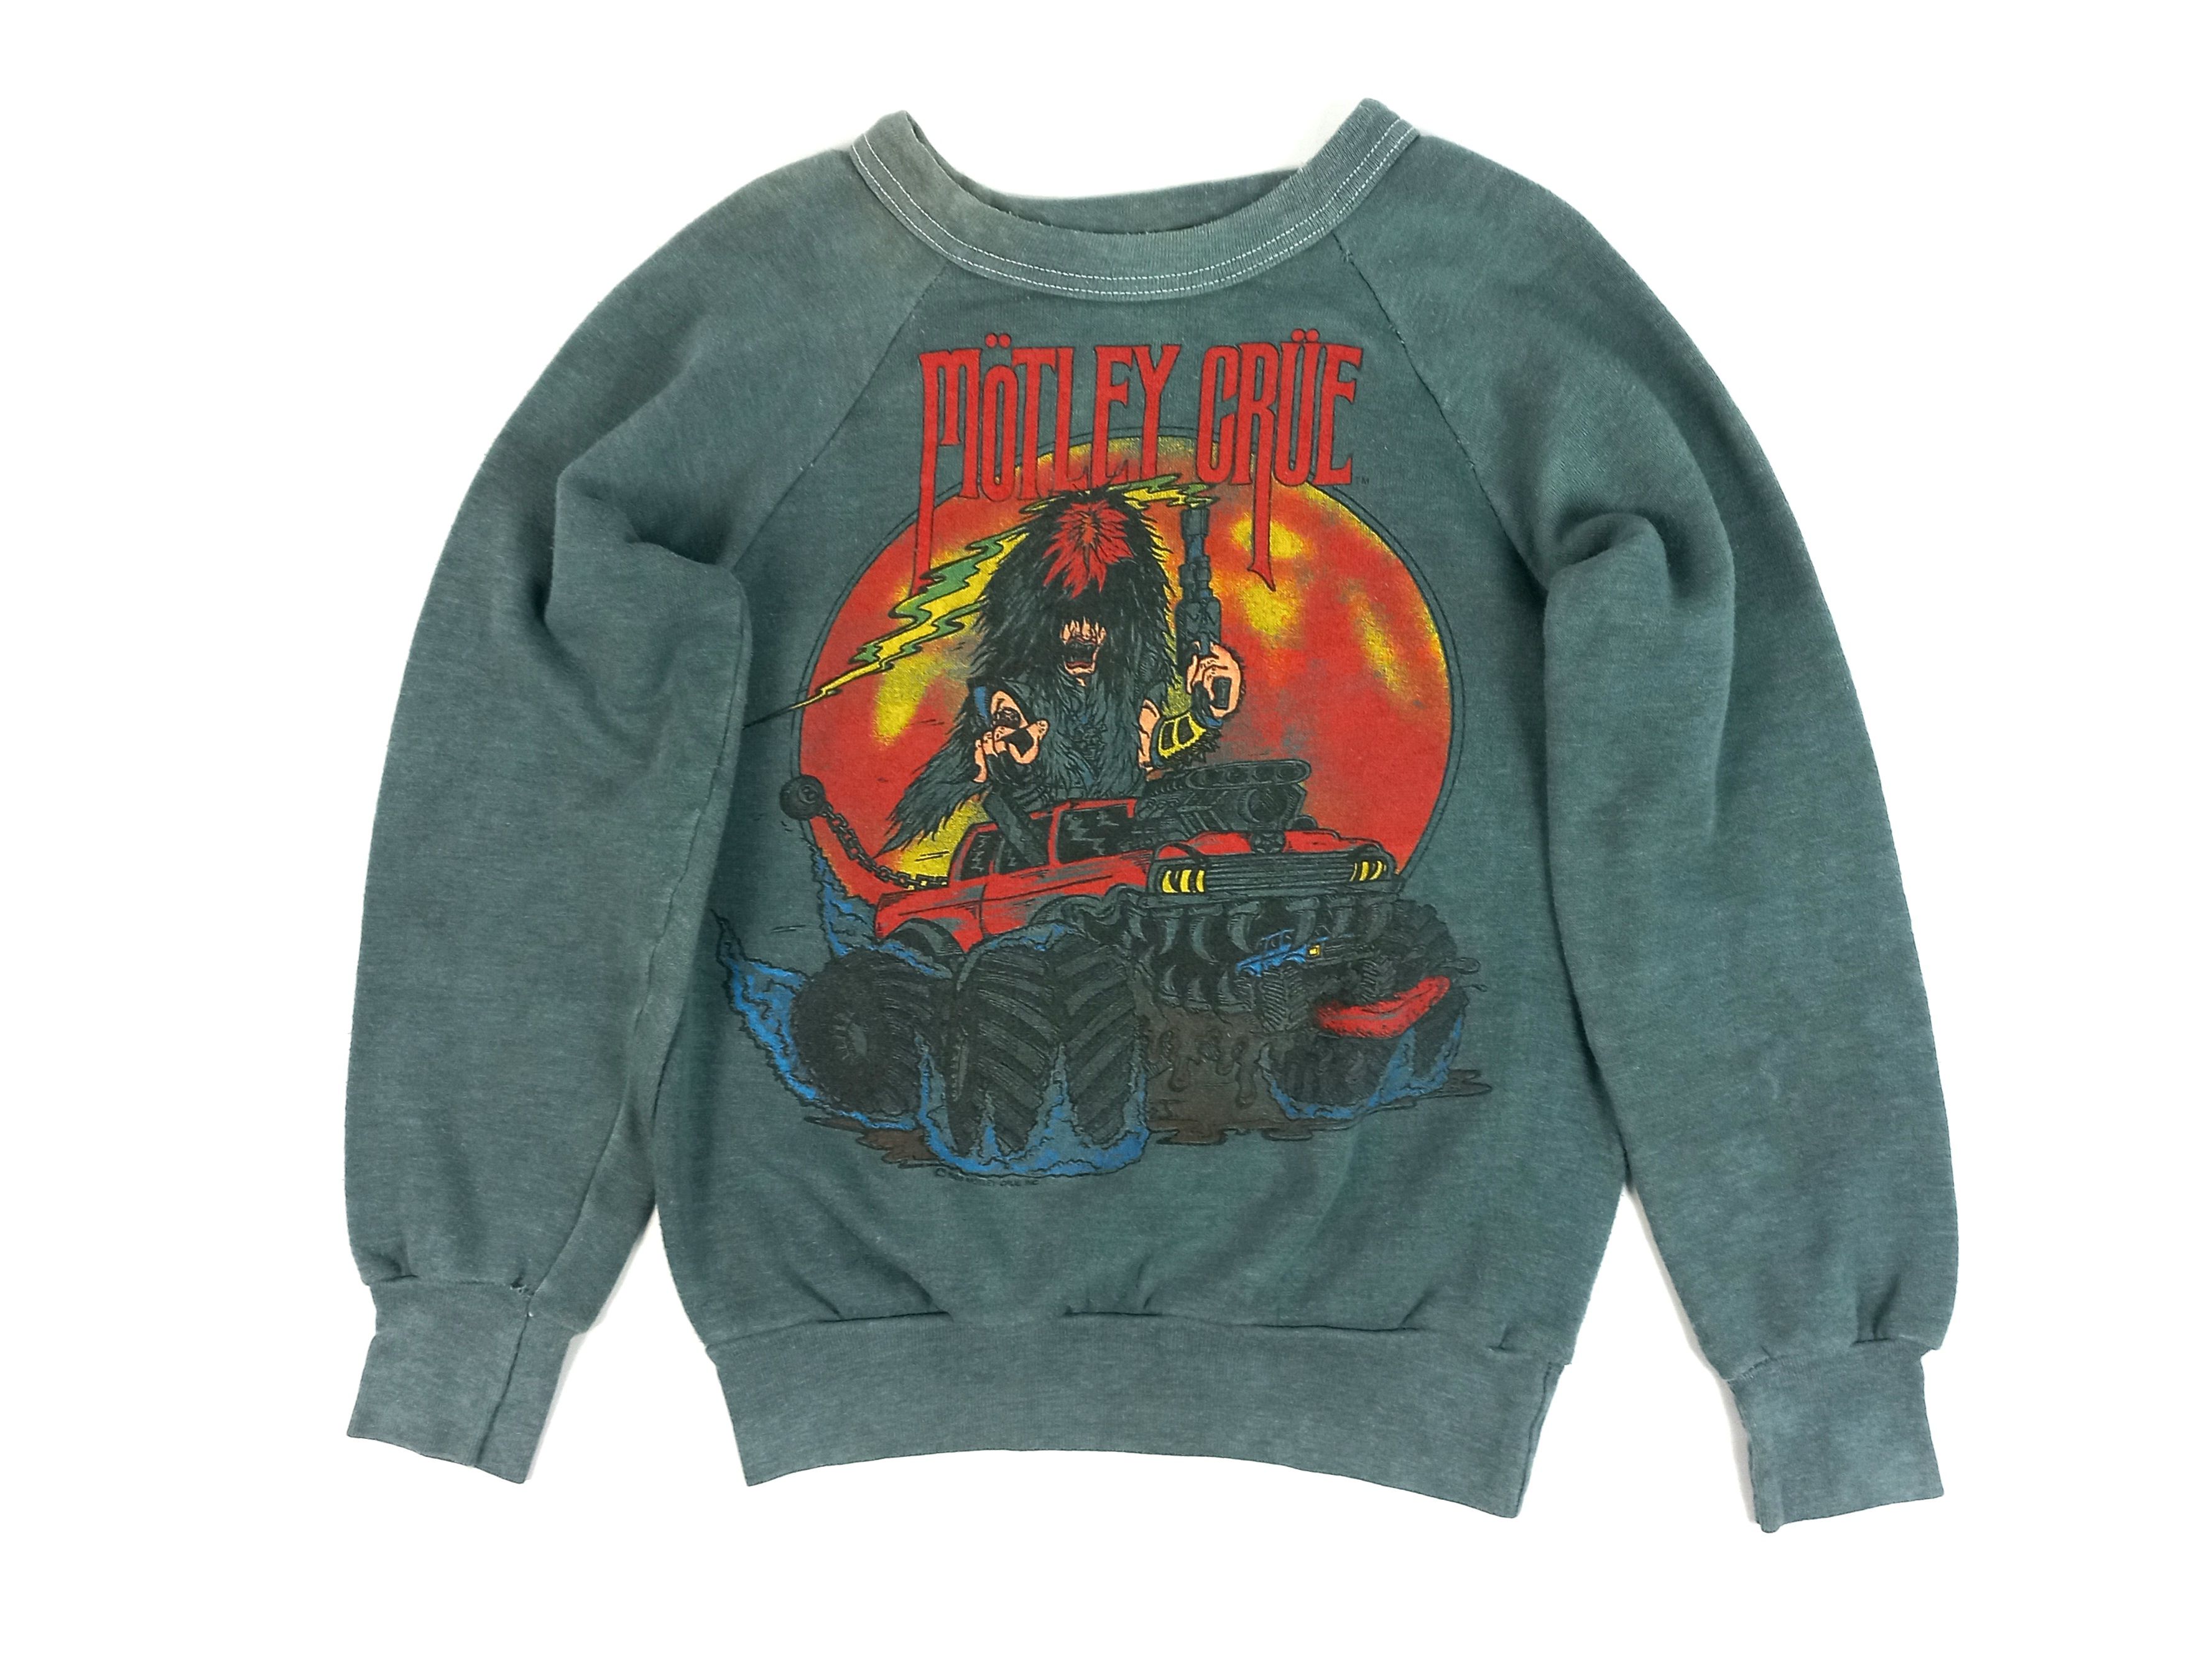 Pre-owned Band Tees X Made In Usa Motley Crue Band Vintage Sweatshirt 1988 In Grey/light Blue